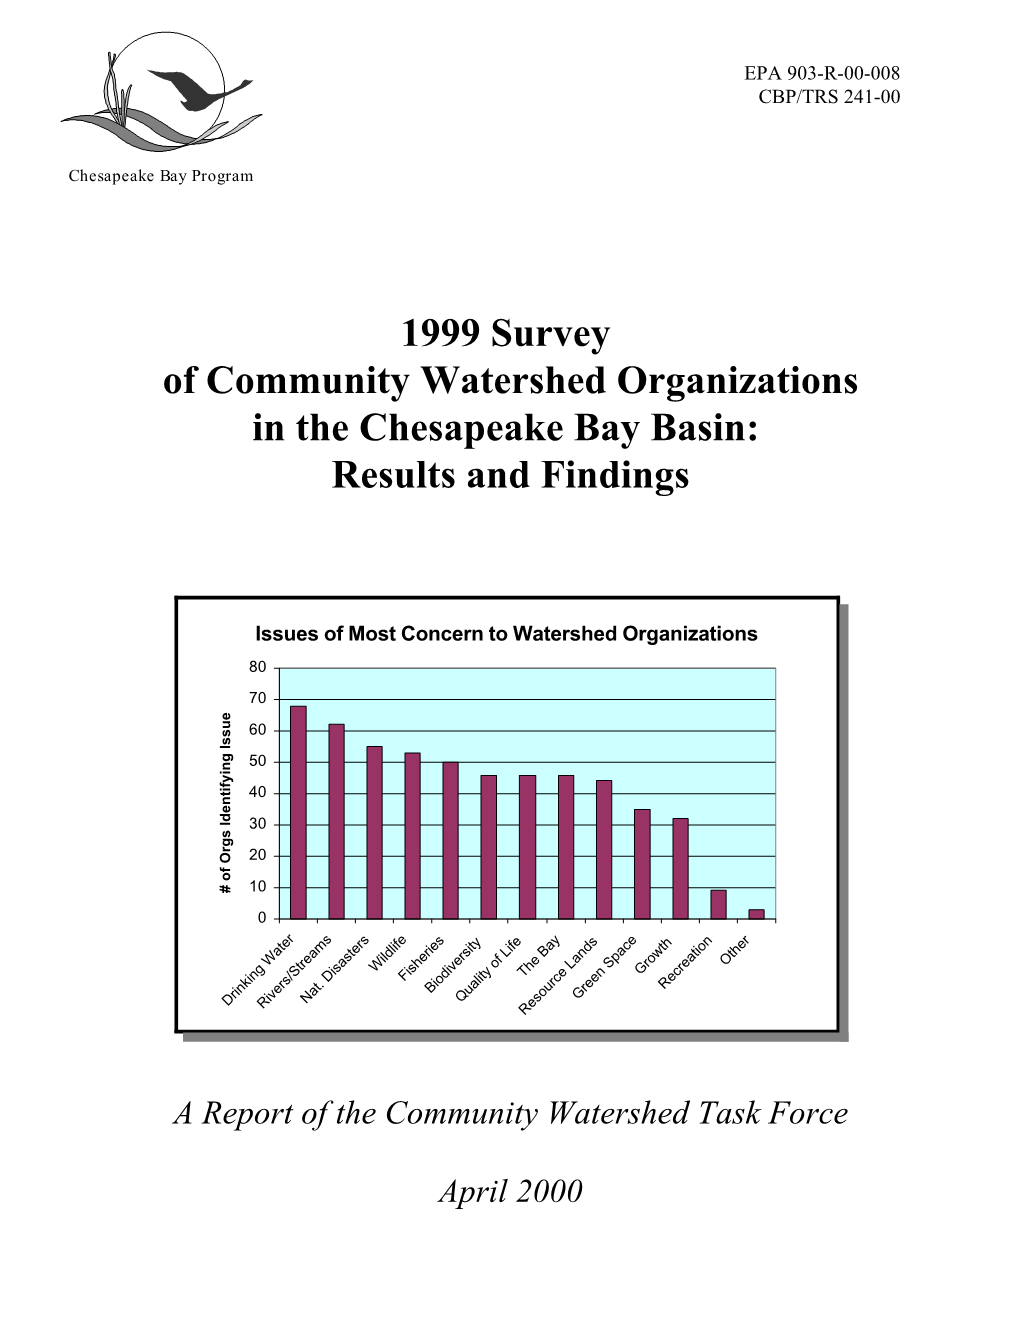 1999 Survey of Community Watershed Organizations in the Chesapeake Bay Basin: Results and Findings